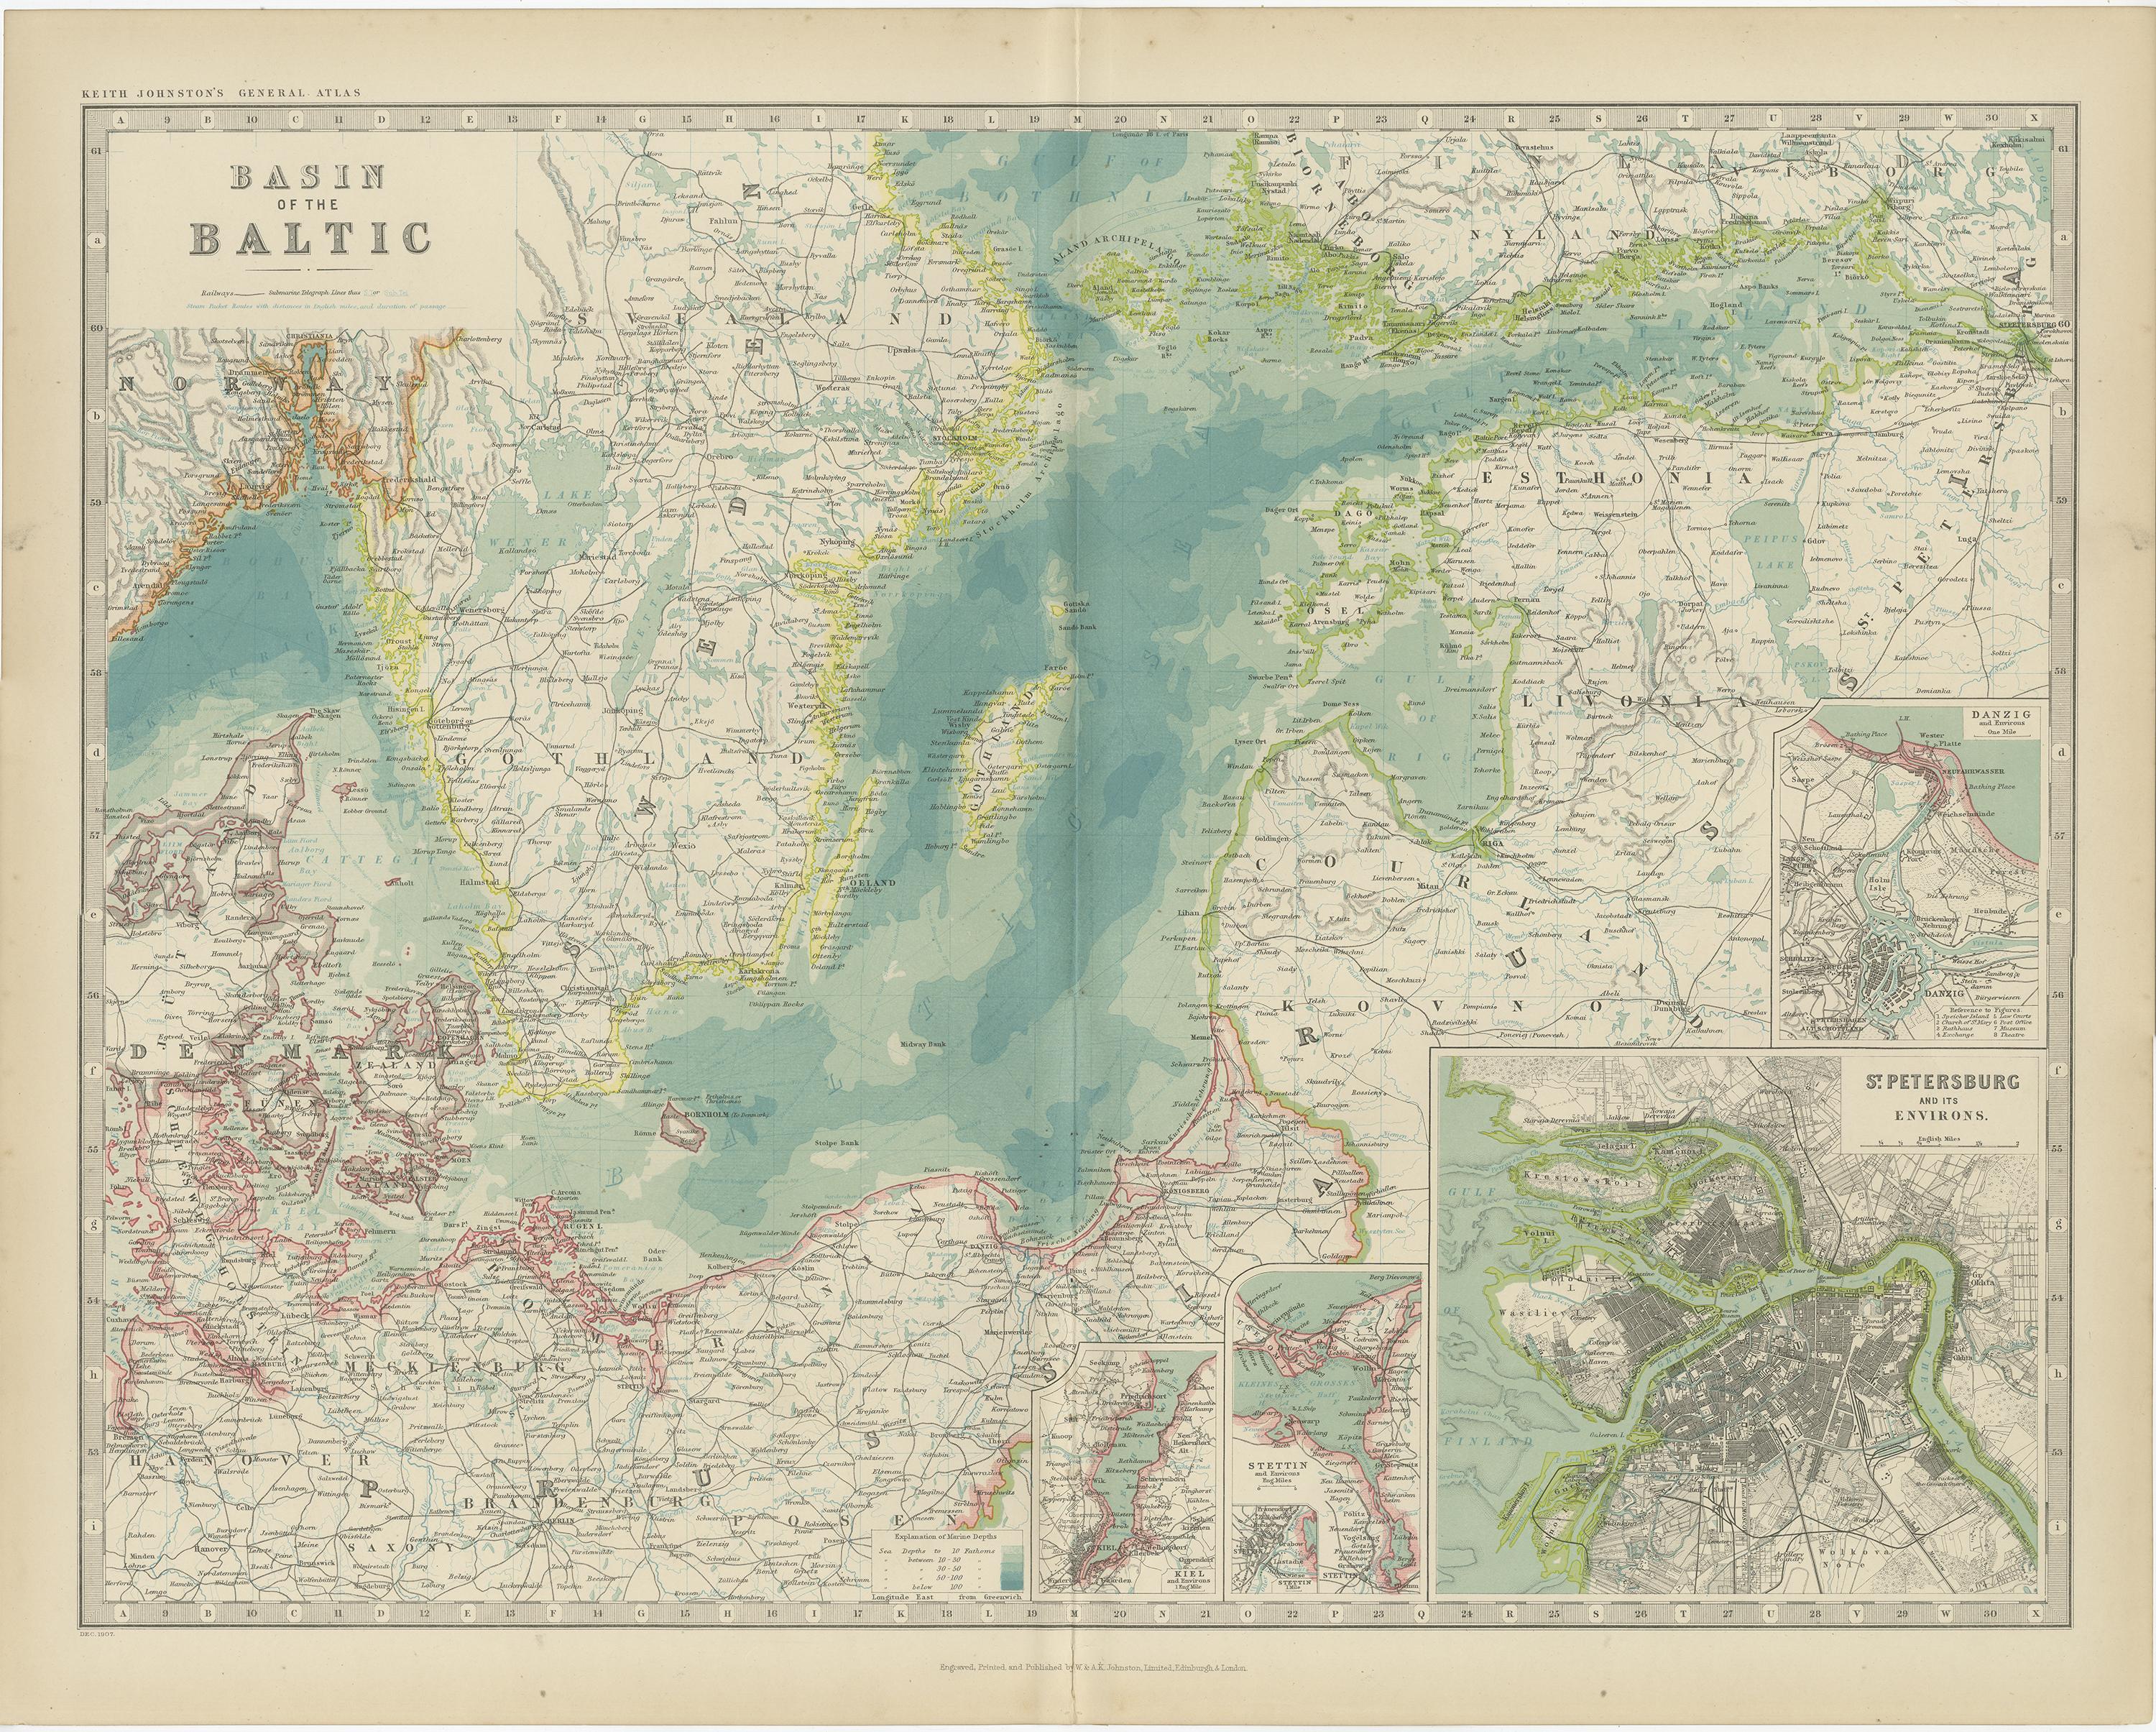 Antique map titled 'Basin of the Baltic'. Original antique map of Baltic Sea. With inset maps of Kiel, Stettin, Danzig and St Petersburg. This map originates from the ‘Royal Atlas of Modern Geography’. Published by W. & A.K. Johnston, 1909.